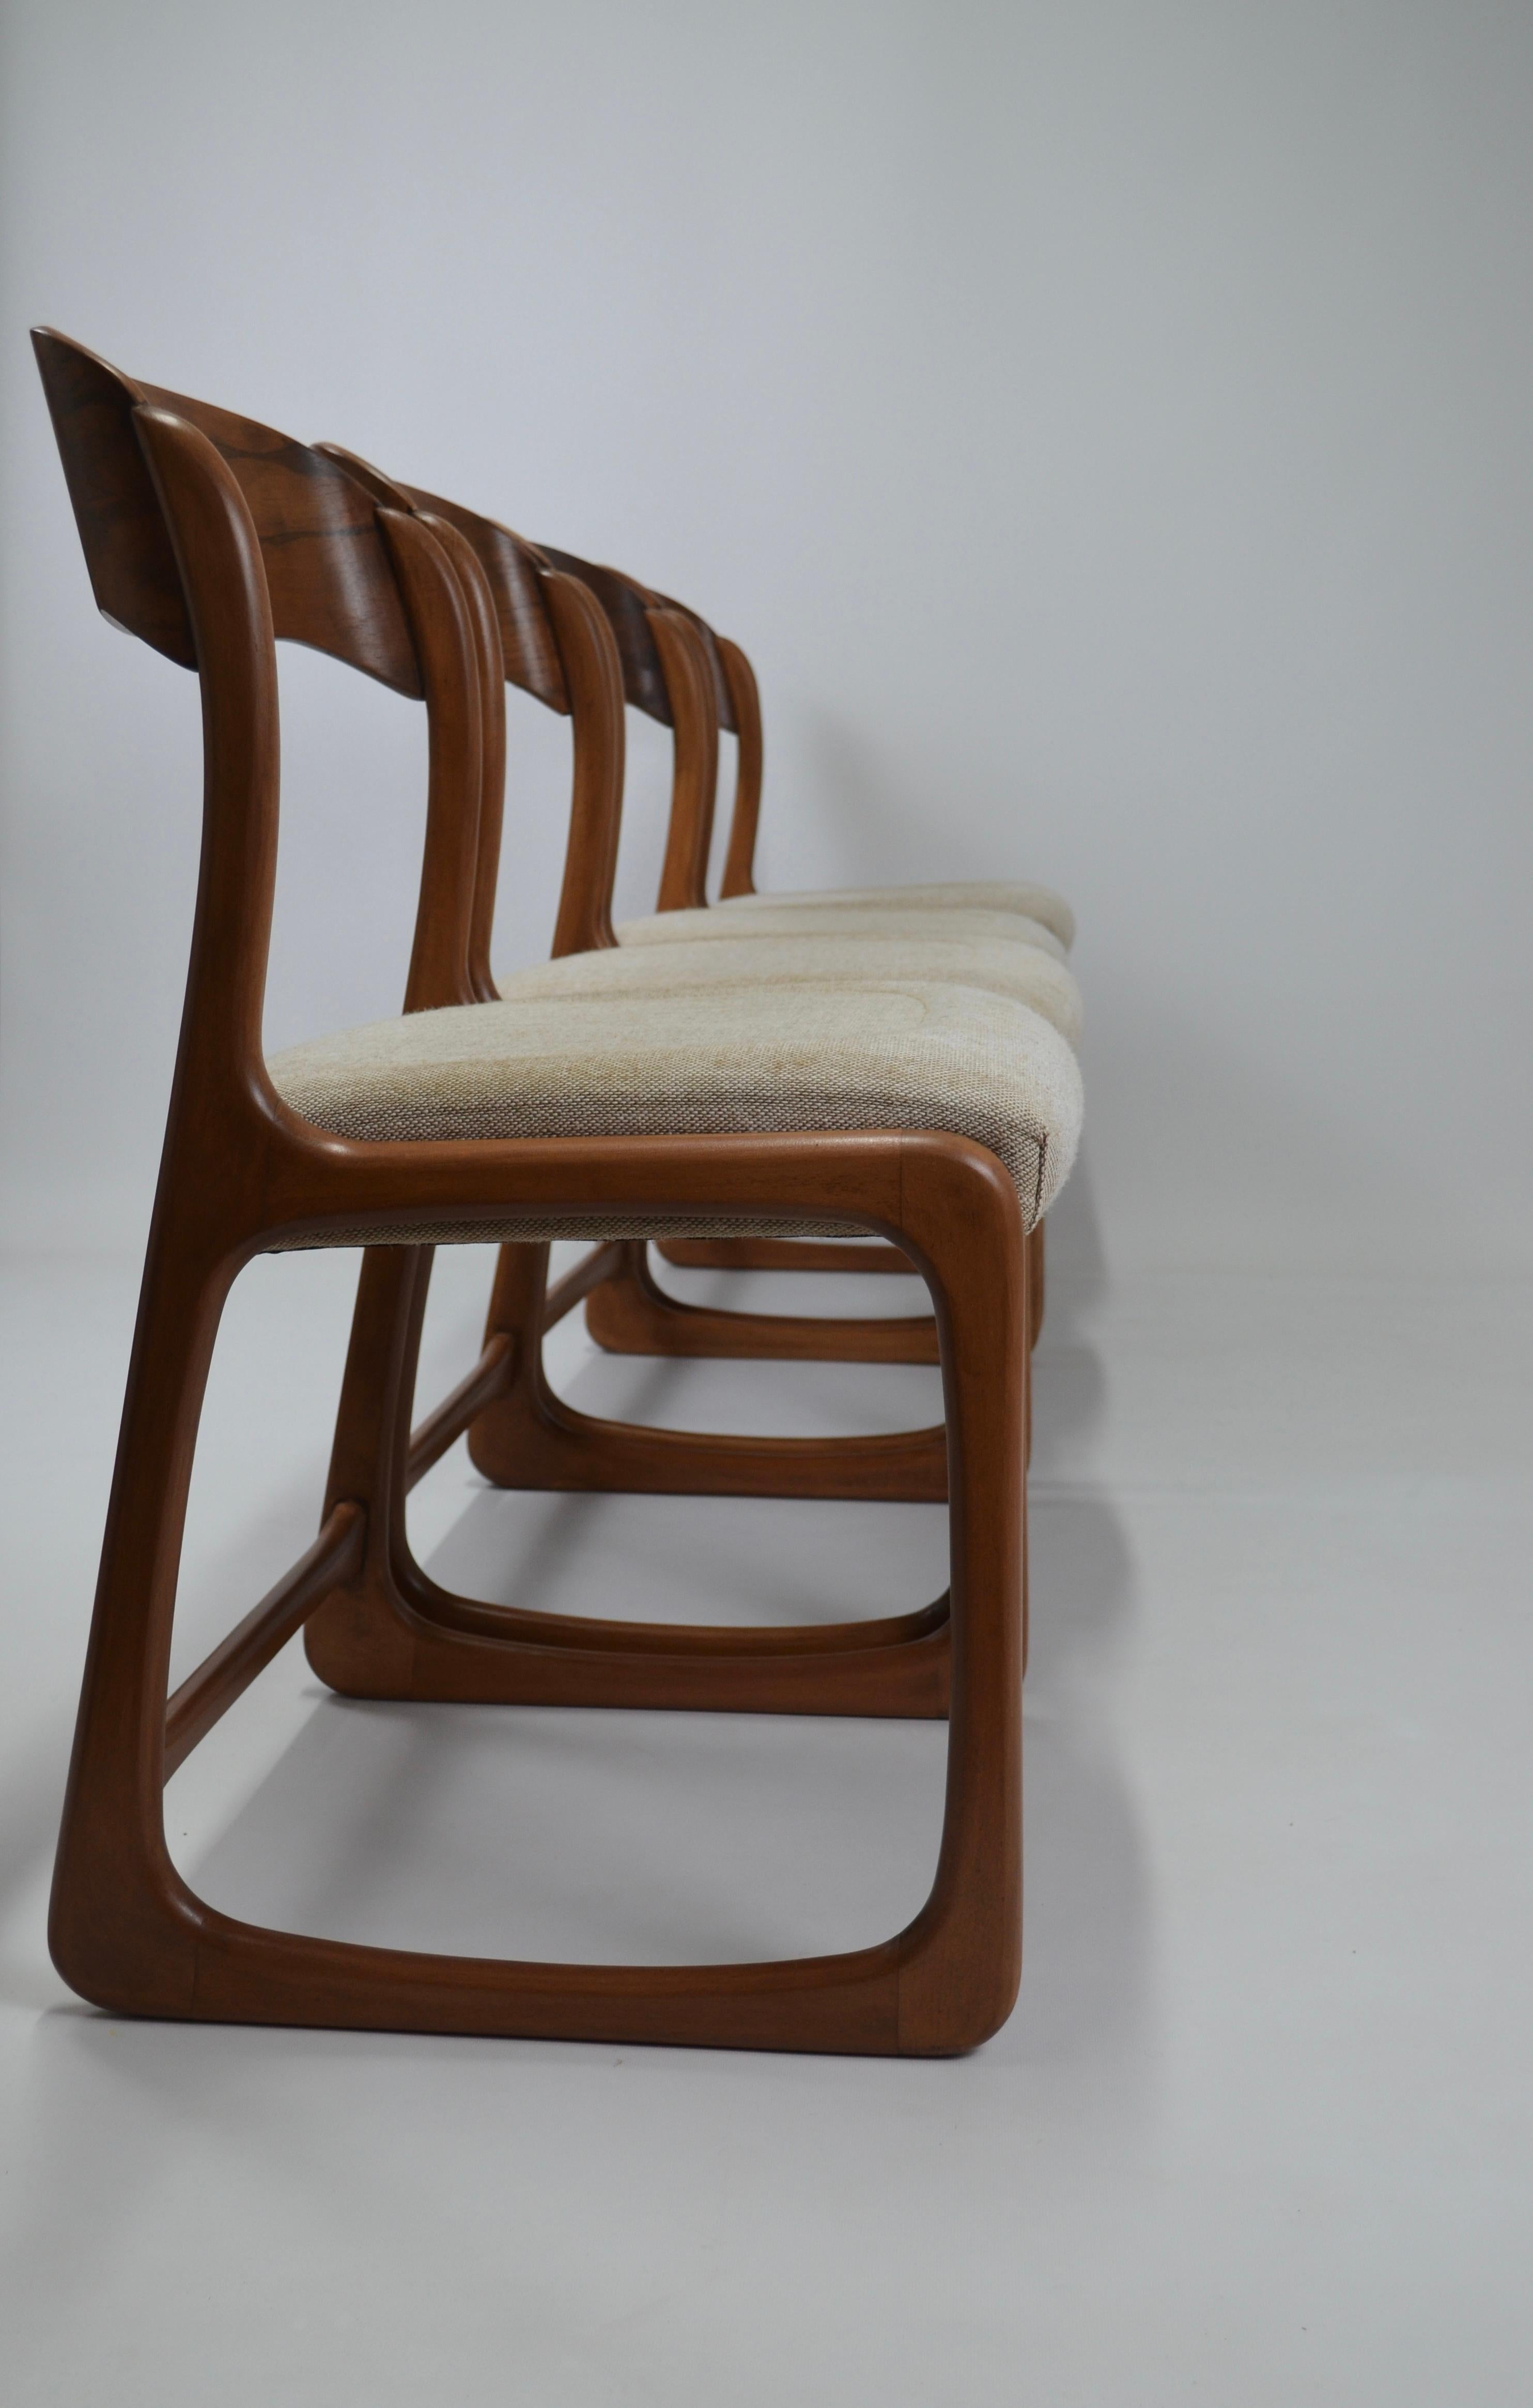 Wood Vintage French Traineau or Sleigh Dining Chairs, Baumann, France, 60s For Sale